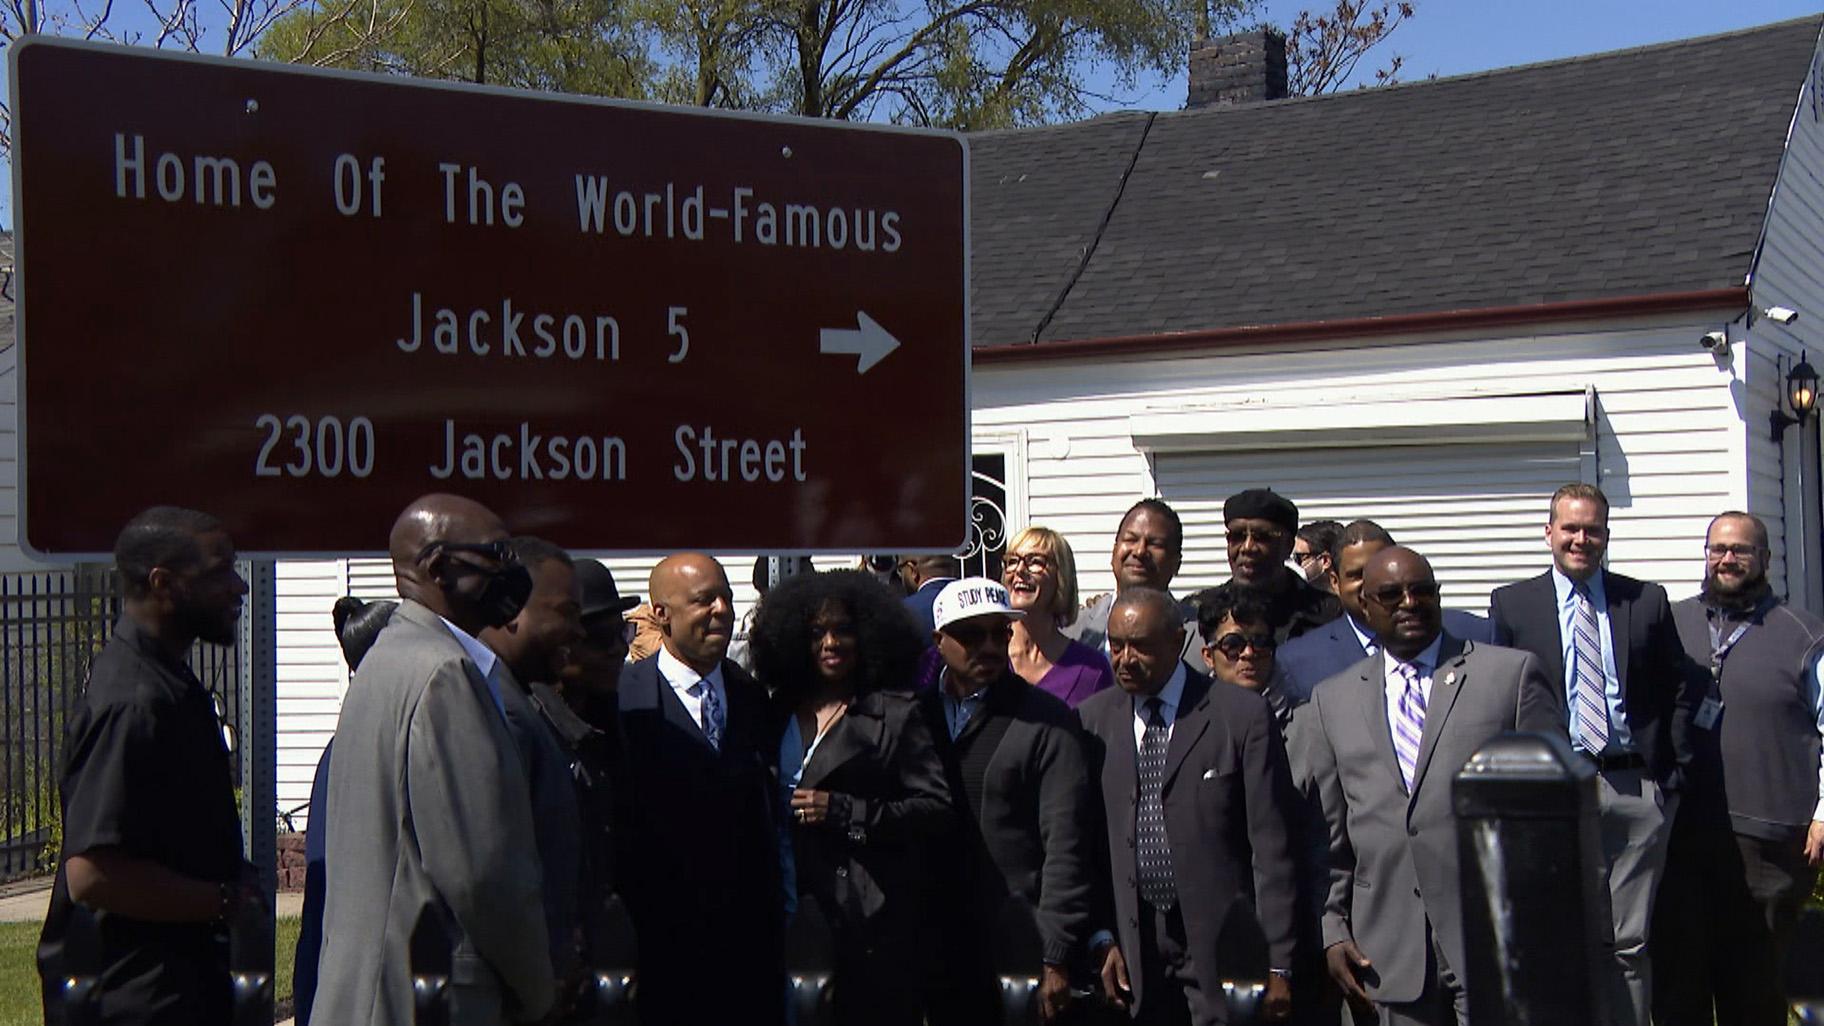 The celebration was in full force at 2300 Jackson Street in Gary, Indiana, as the city marked the home of the Jackson 5 with official highway signage. May 13, 2021. (WTTW News)